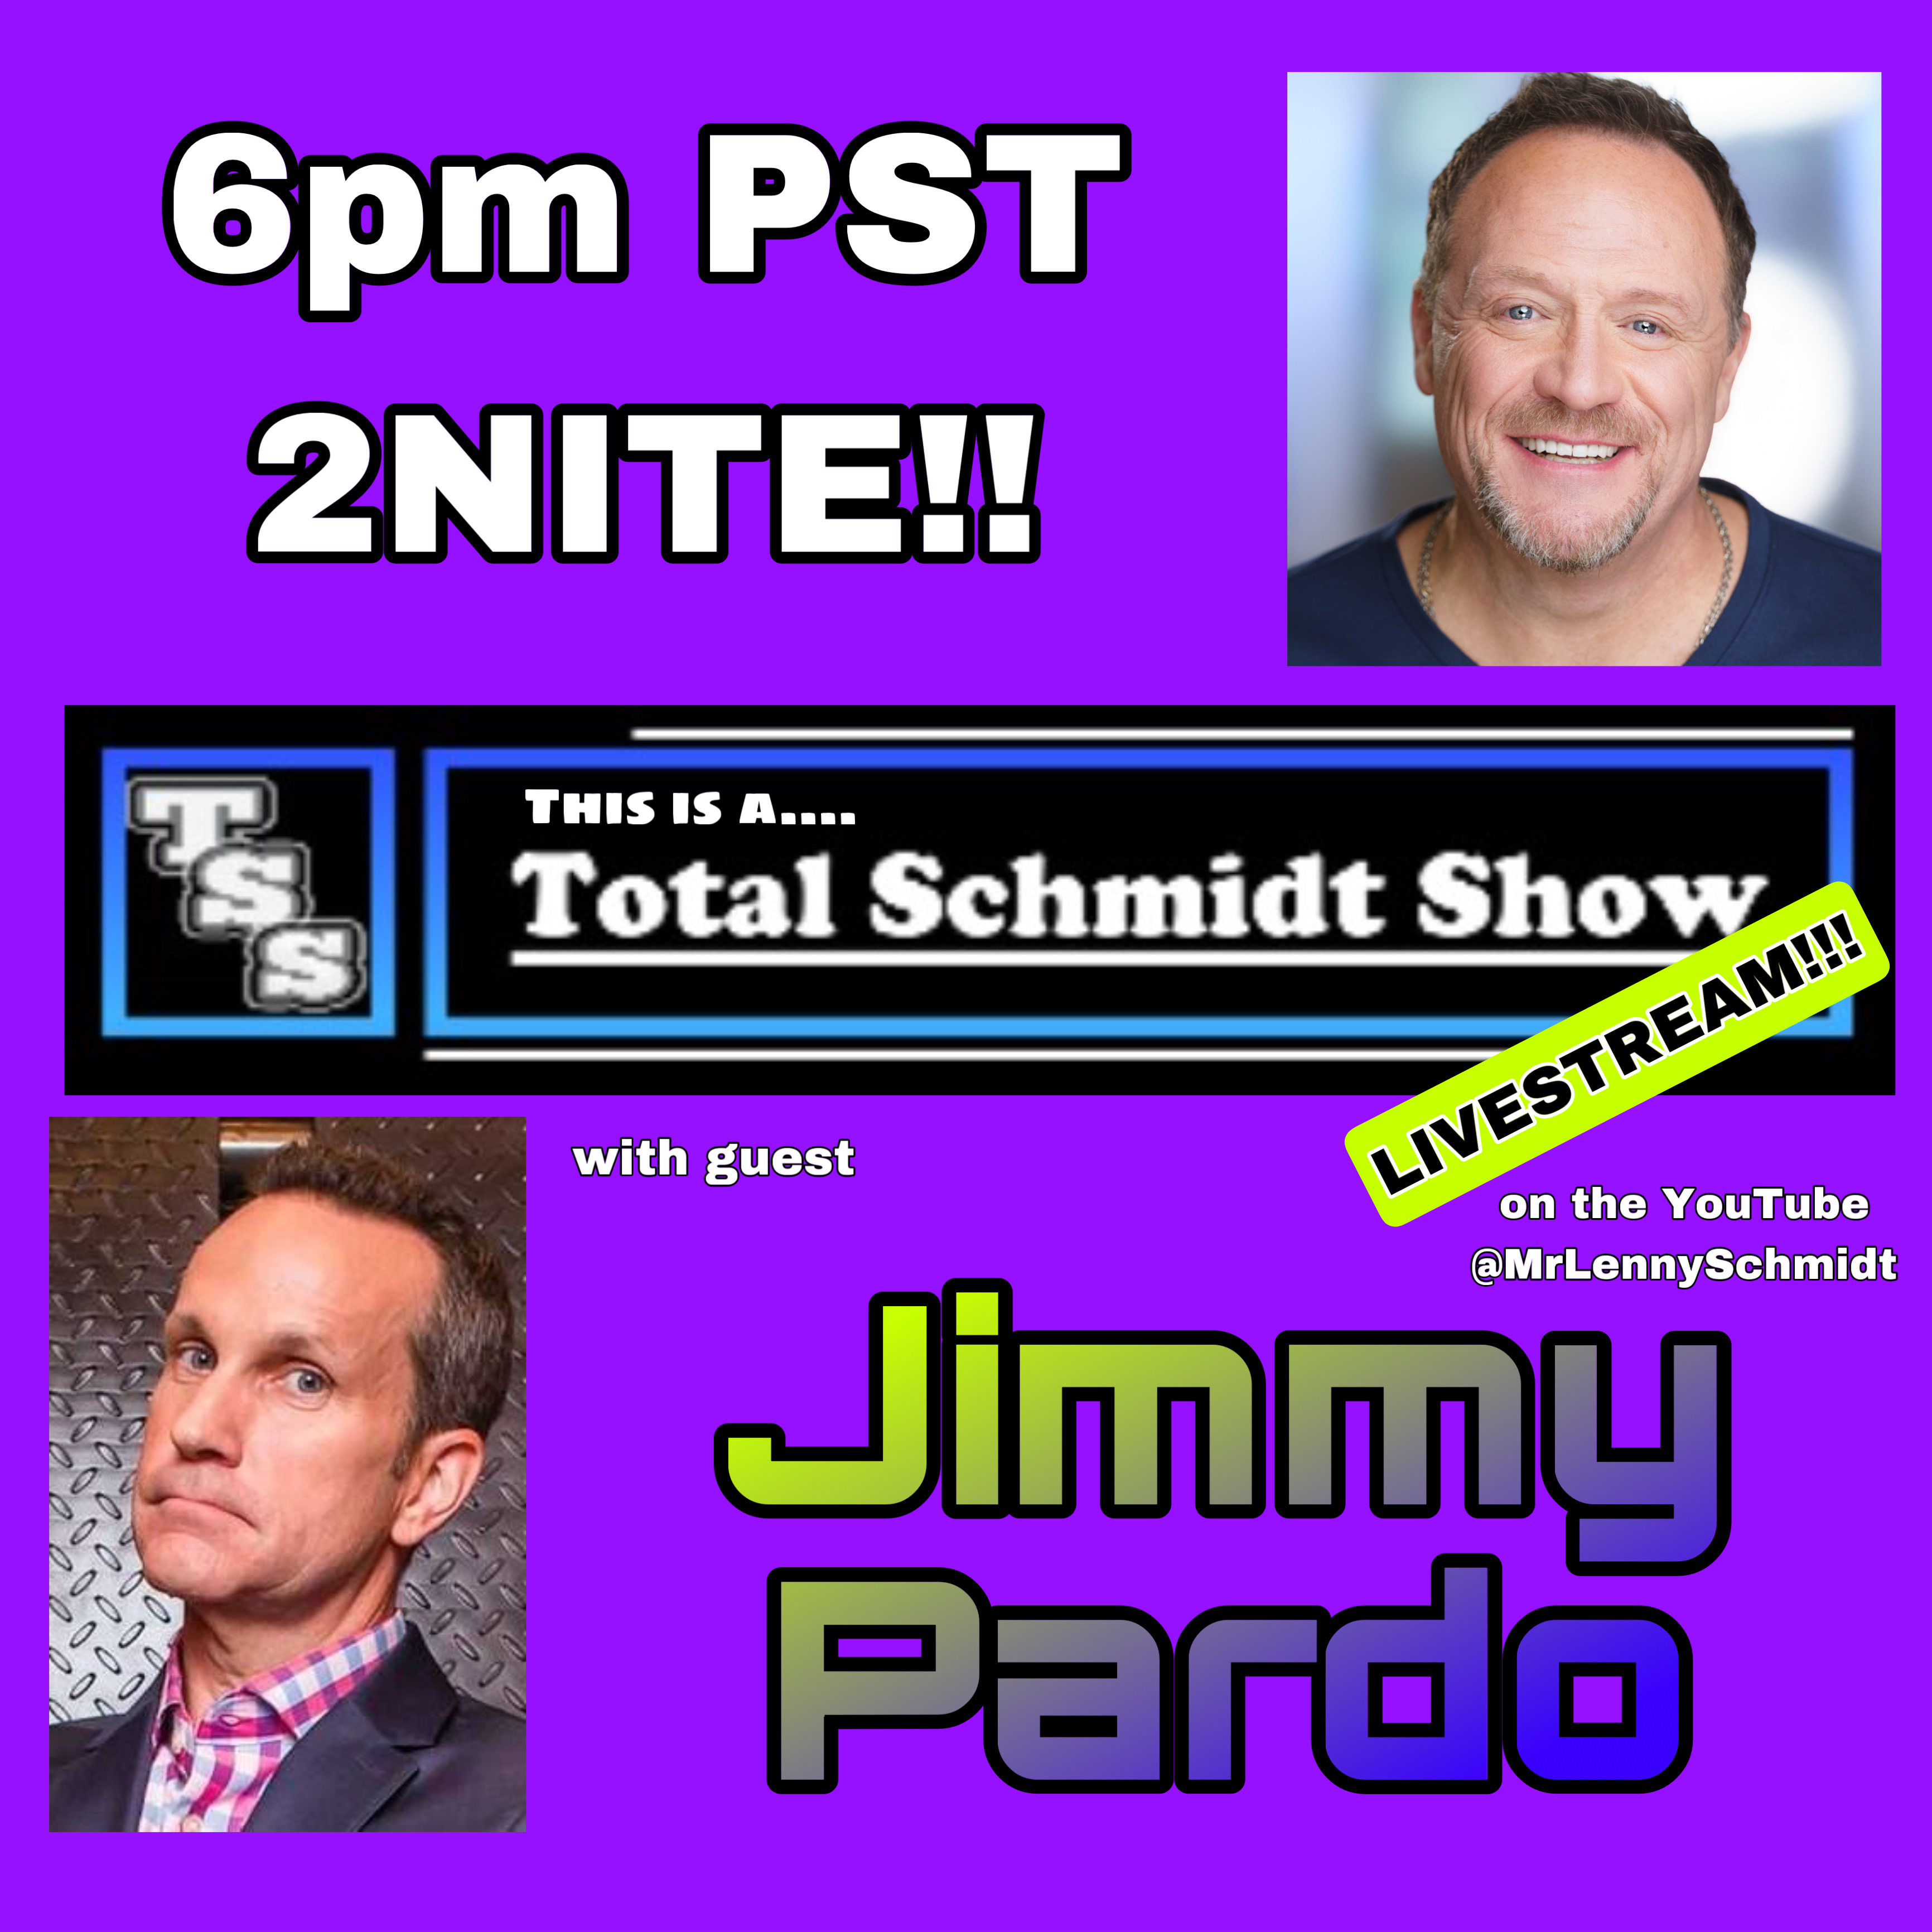 Jimmy Pardo Livestream 2nite on “This is a Total Schmidt Show”